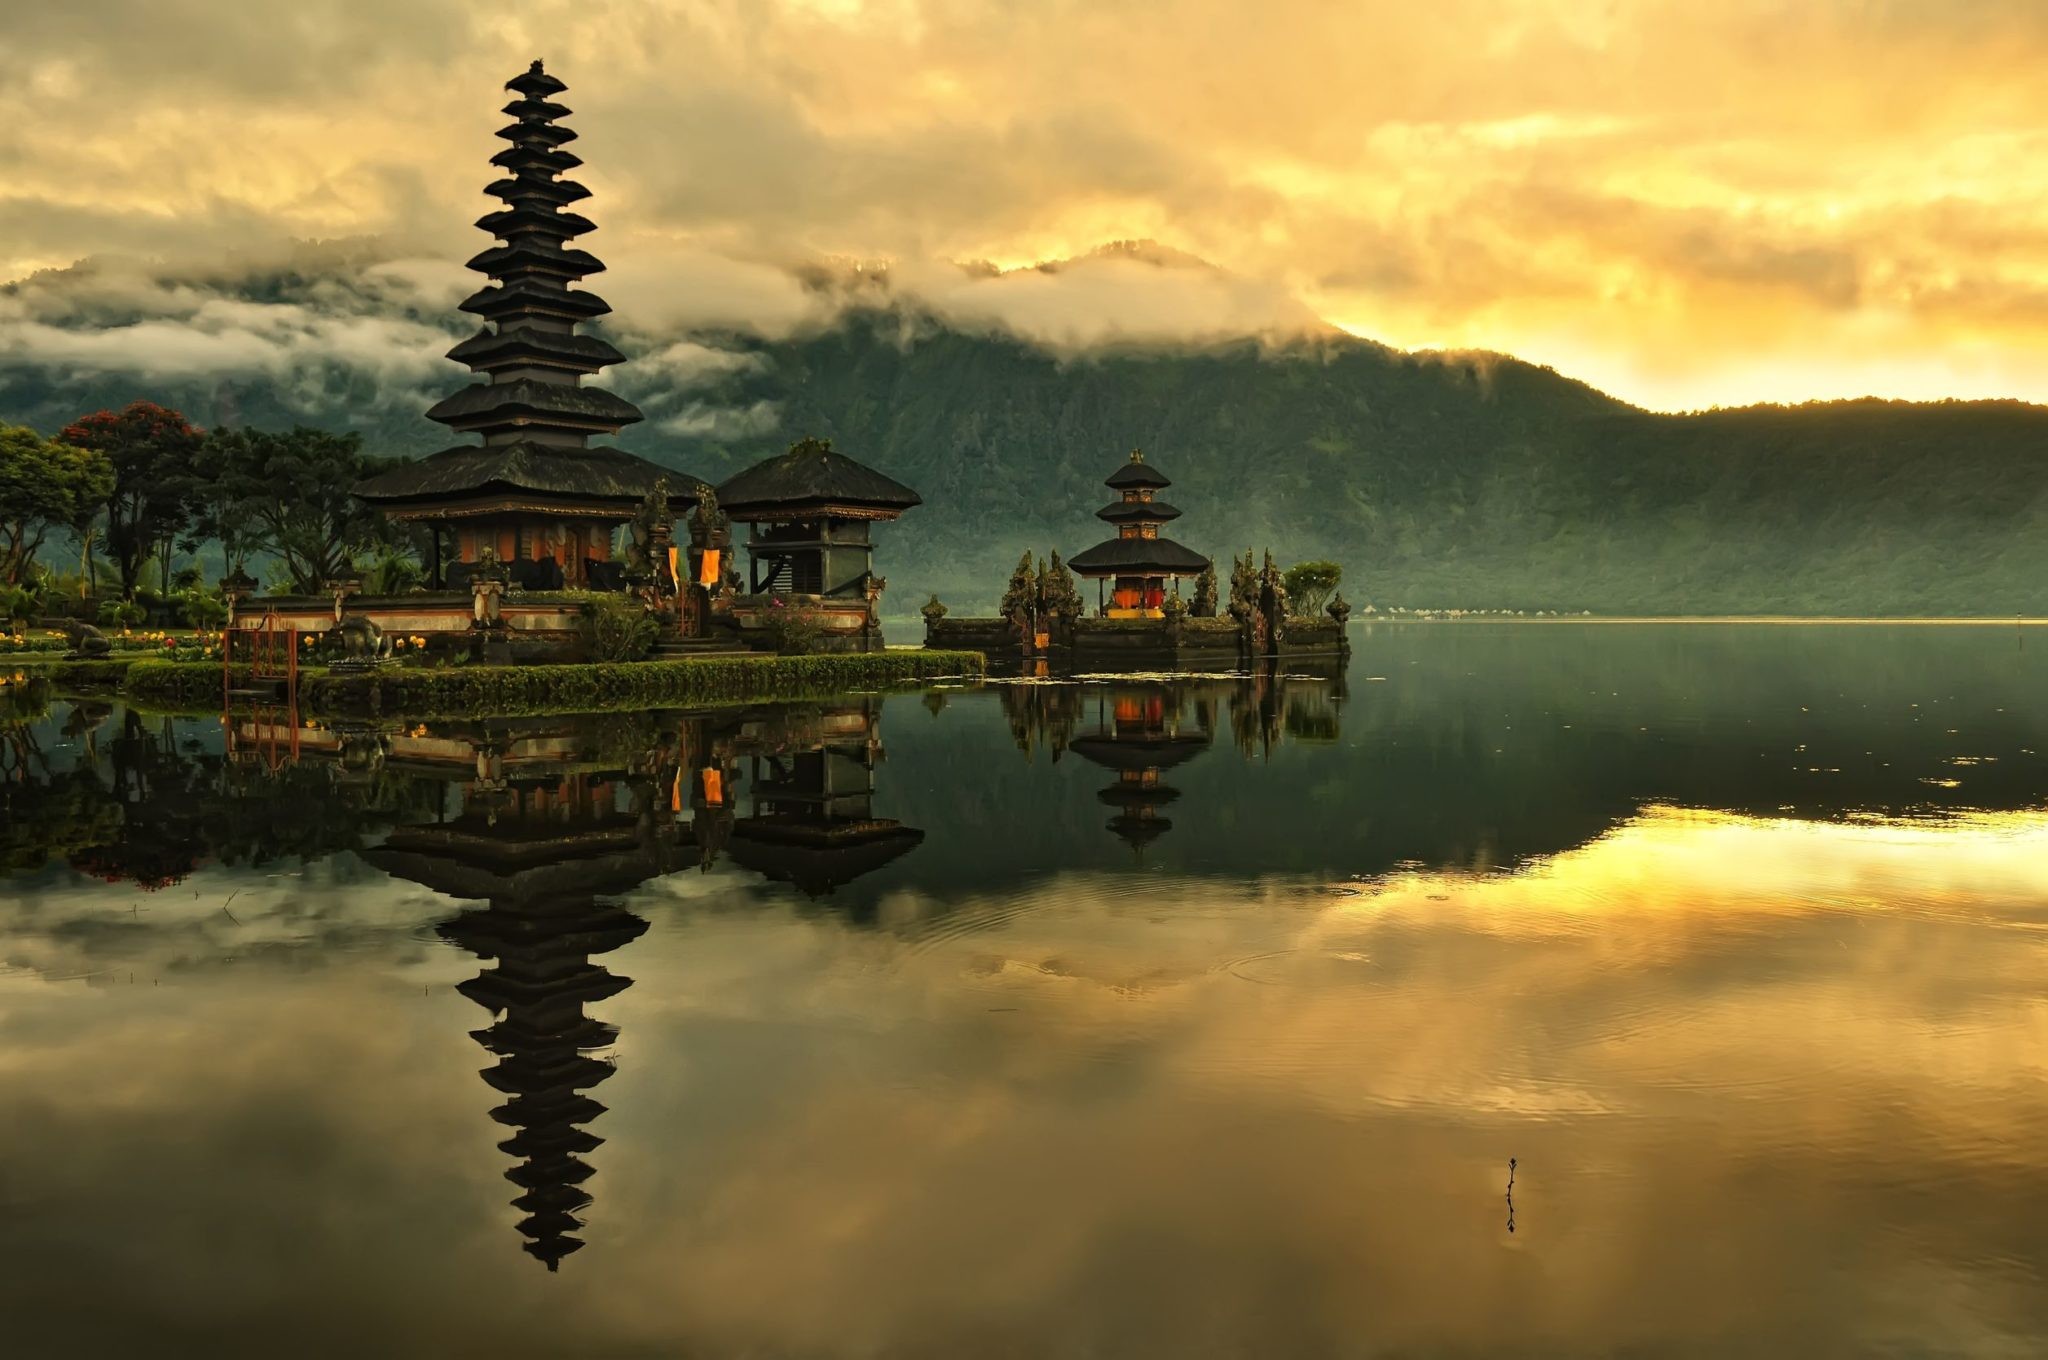 General 2048x1360 nature landscape water Indonesia Bali island lake temple Asian architecture clouds sunrise mist trees mountains hills forest reflection morning